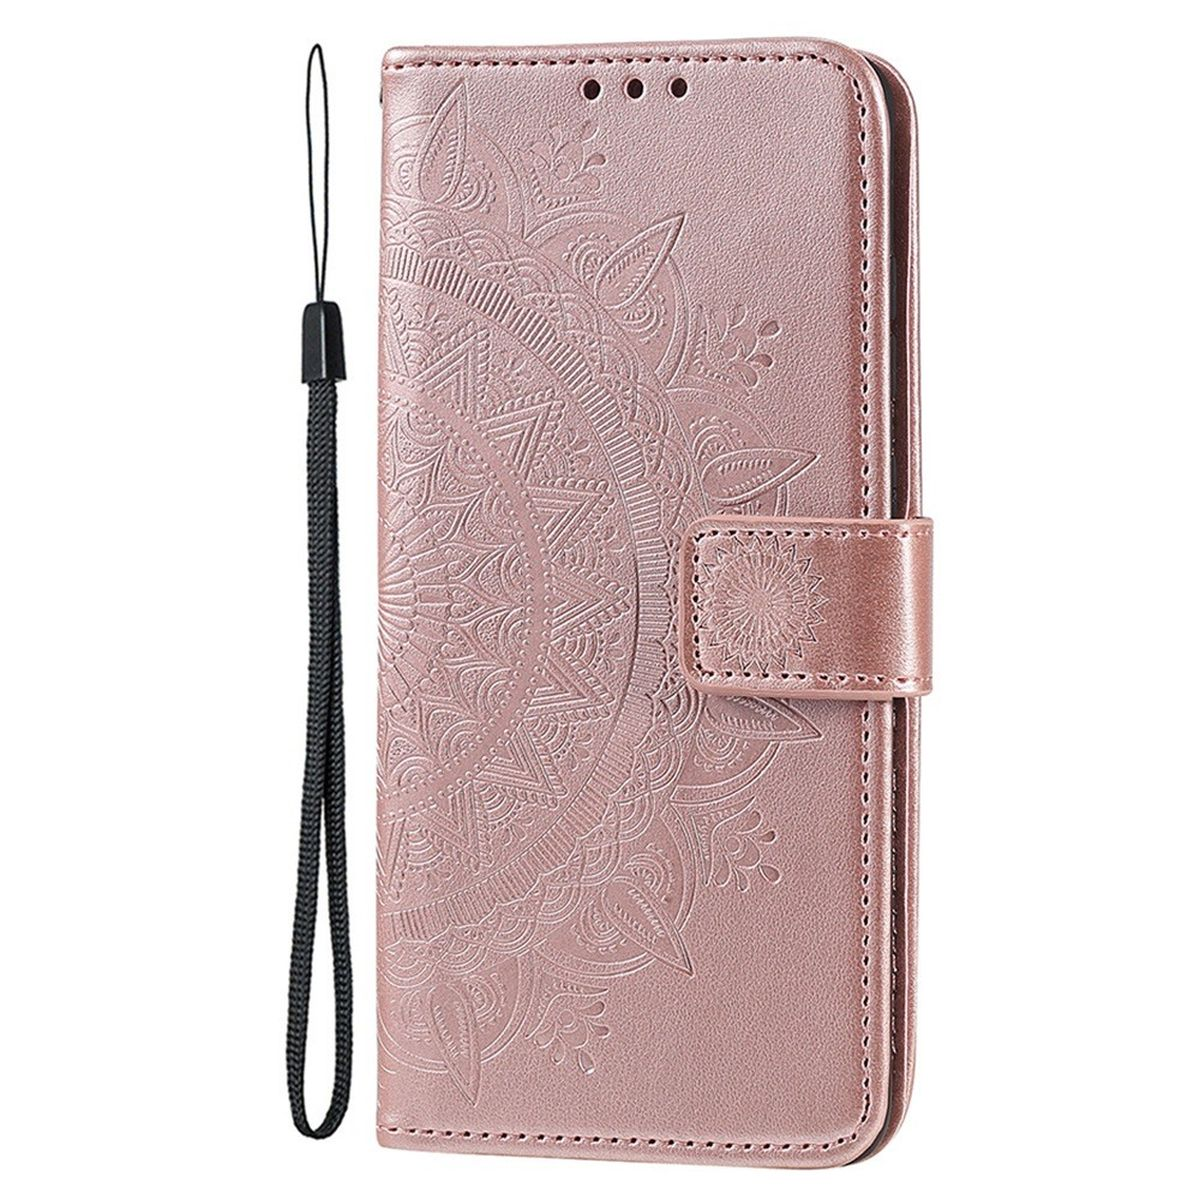 COVERKINGZ Klapphülle mit Mandala 14 Rosegold Apple, Bookcover, Pro, Muster, iPhone